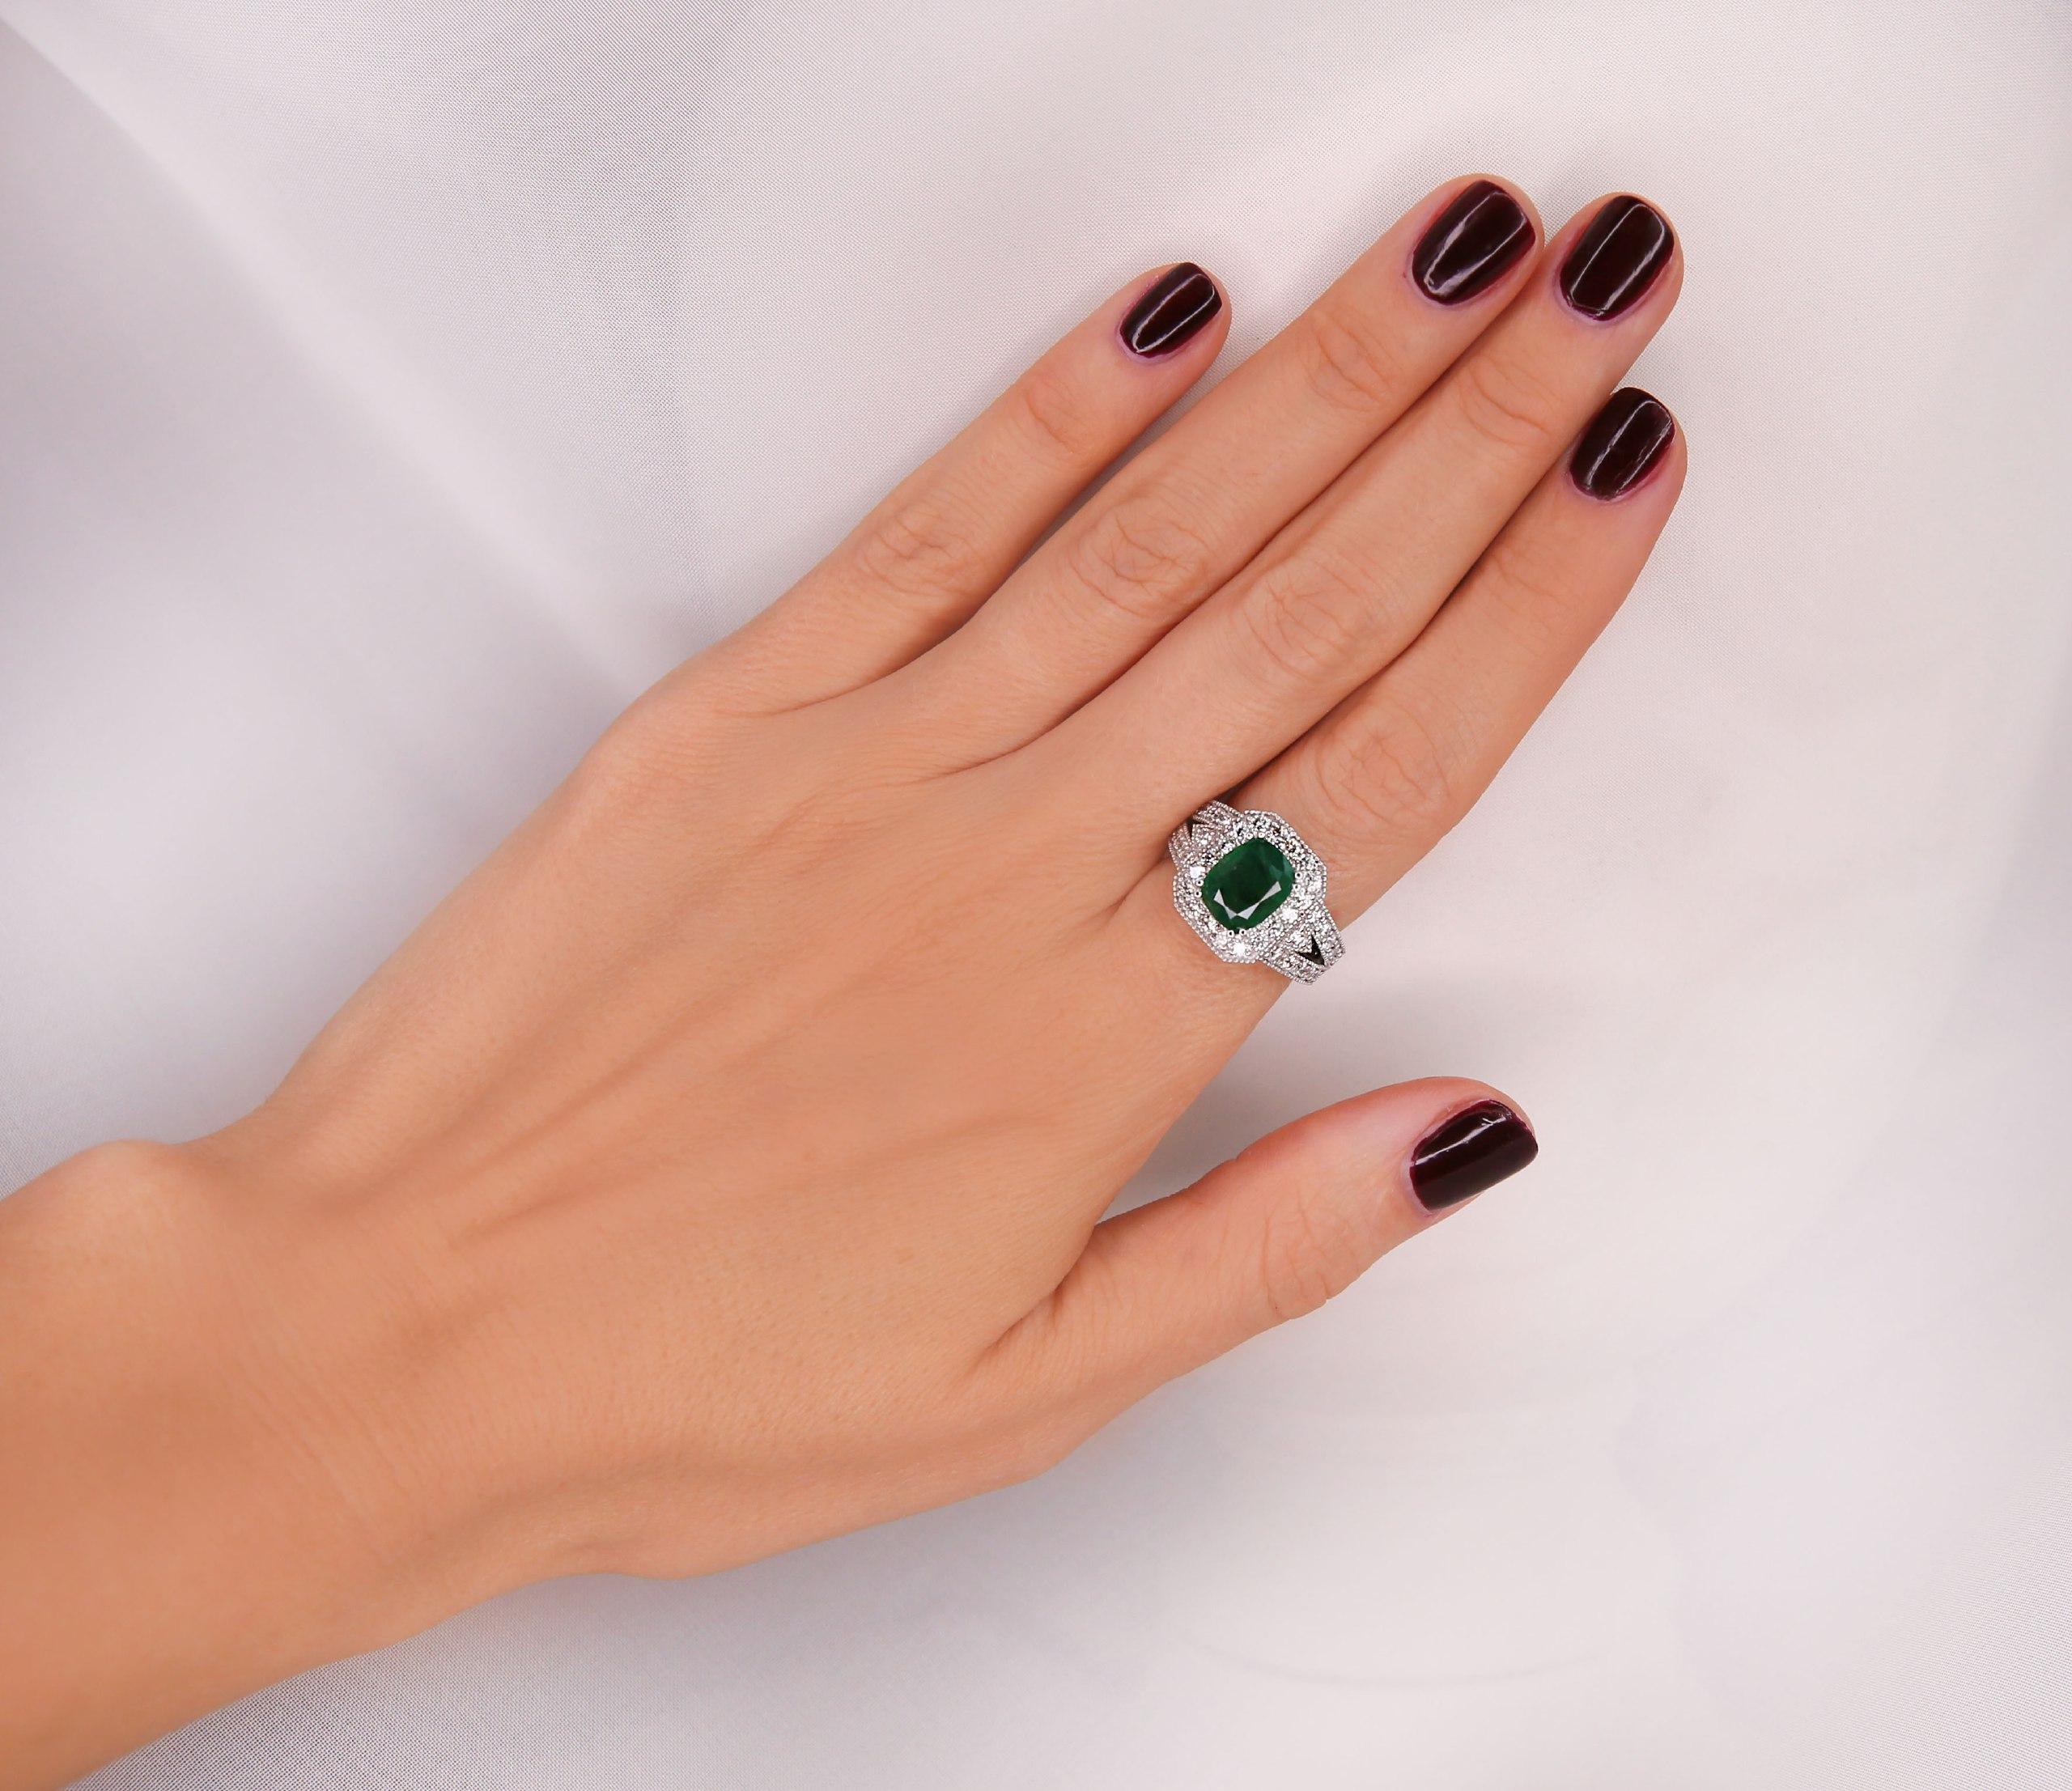 Ring White Gold 18 K 
Material: 18K White Gold 

Mainstone: Natural Emerald
 2.17 Carat 

Stone Shape: Oval 
Dimensions: 9.14x7.32 mm 
Treatment Method: Oil

Natural  Diamond

Color: F-G 
Clarity: VS2-SI1 
1.00 Carat Round 
Not-treated 
Total All